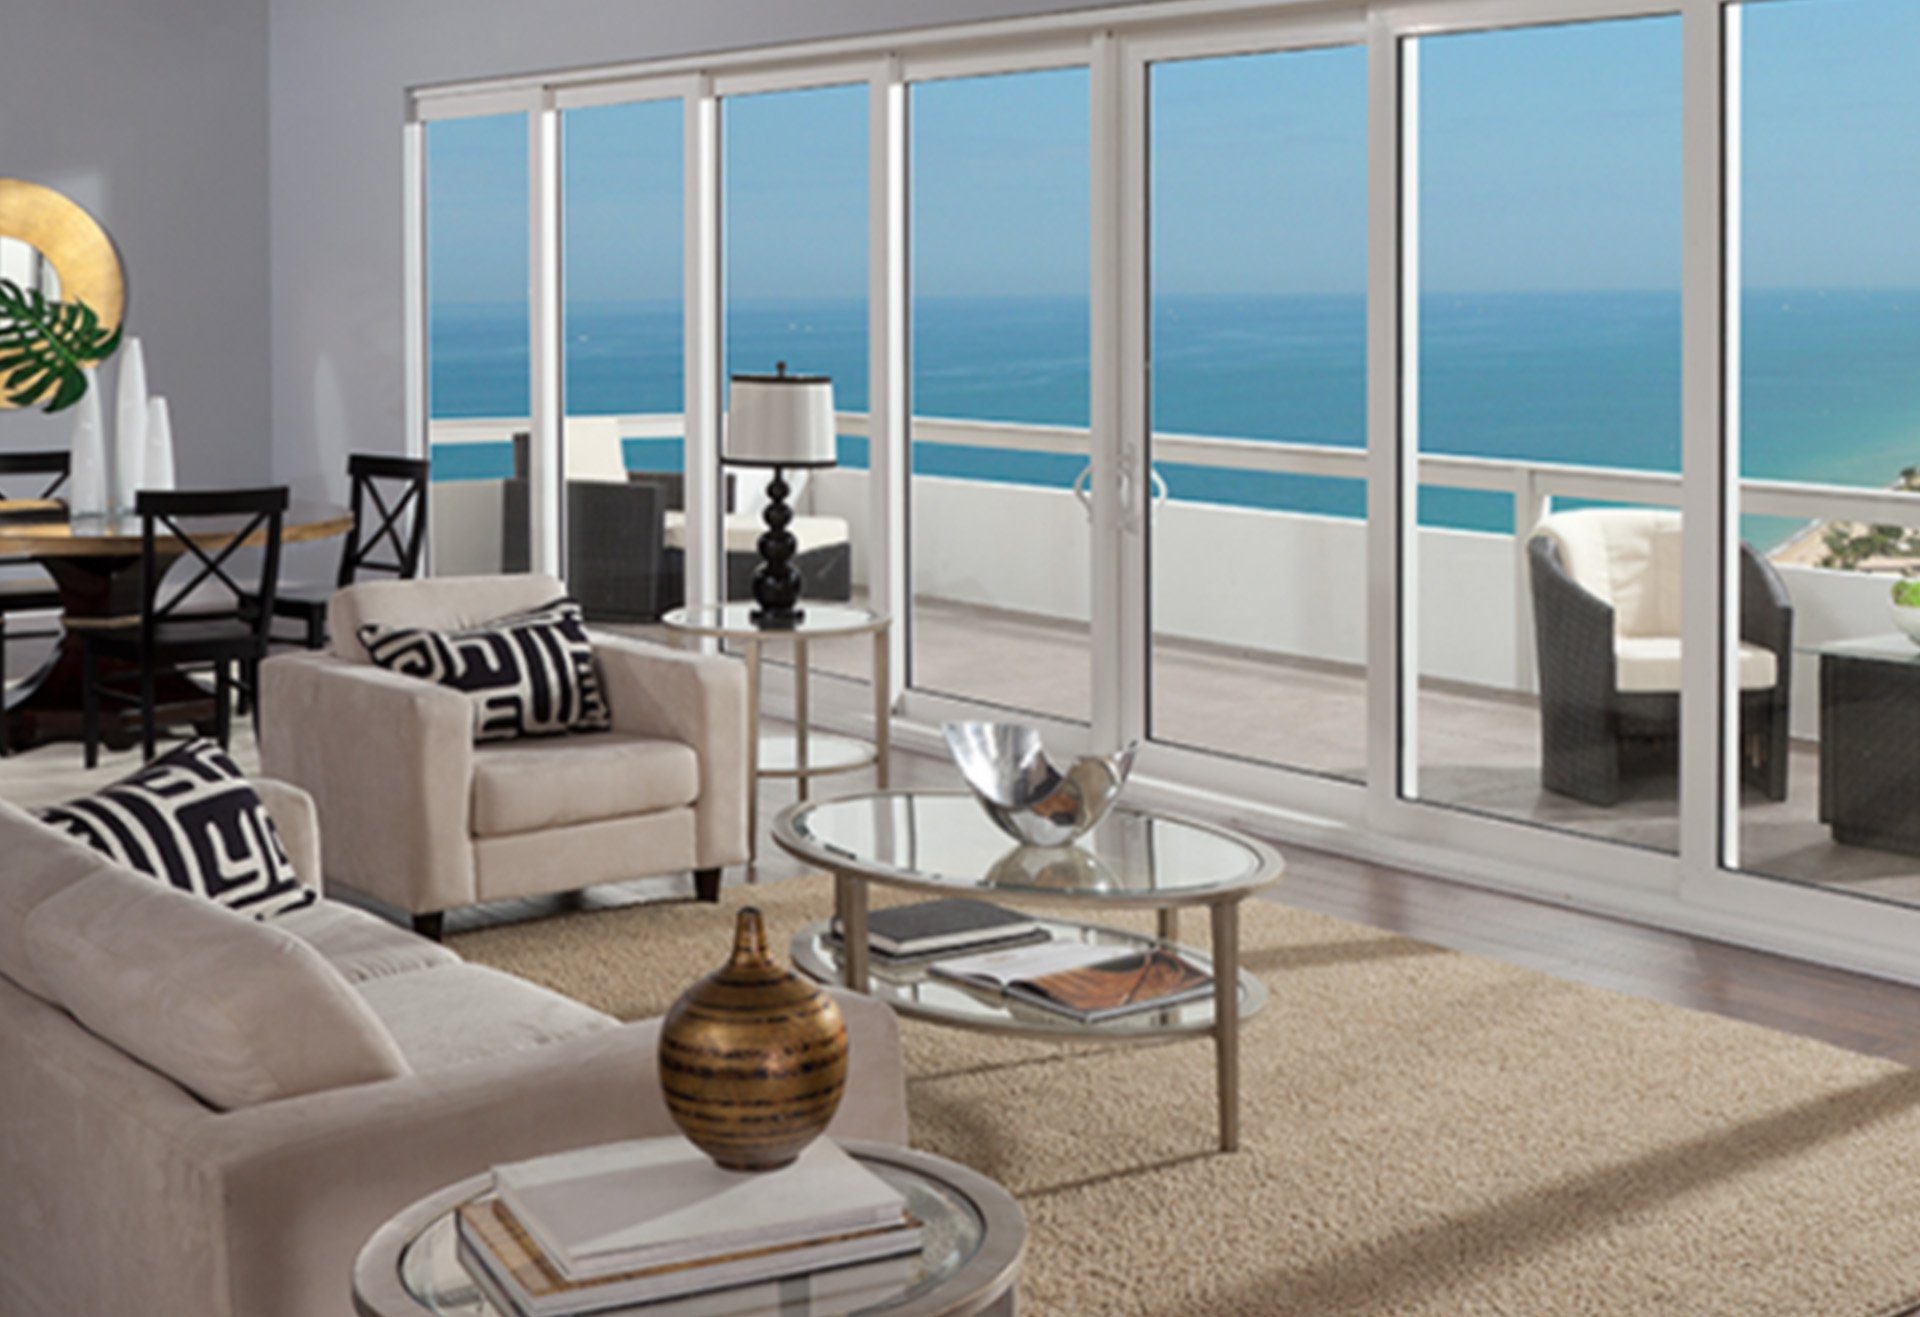 Beautiful apartment with floor to ceiling impact windows. Should you get impact windows concept image.